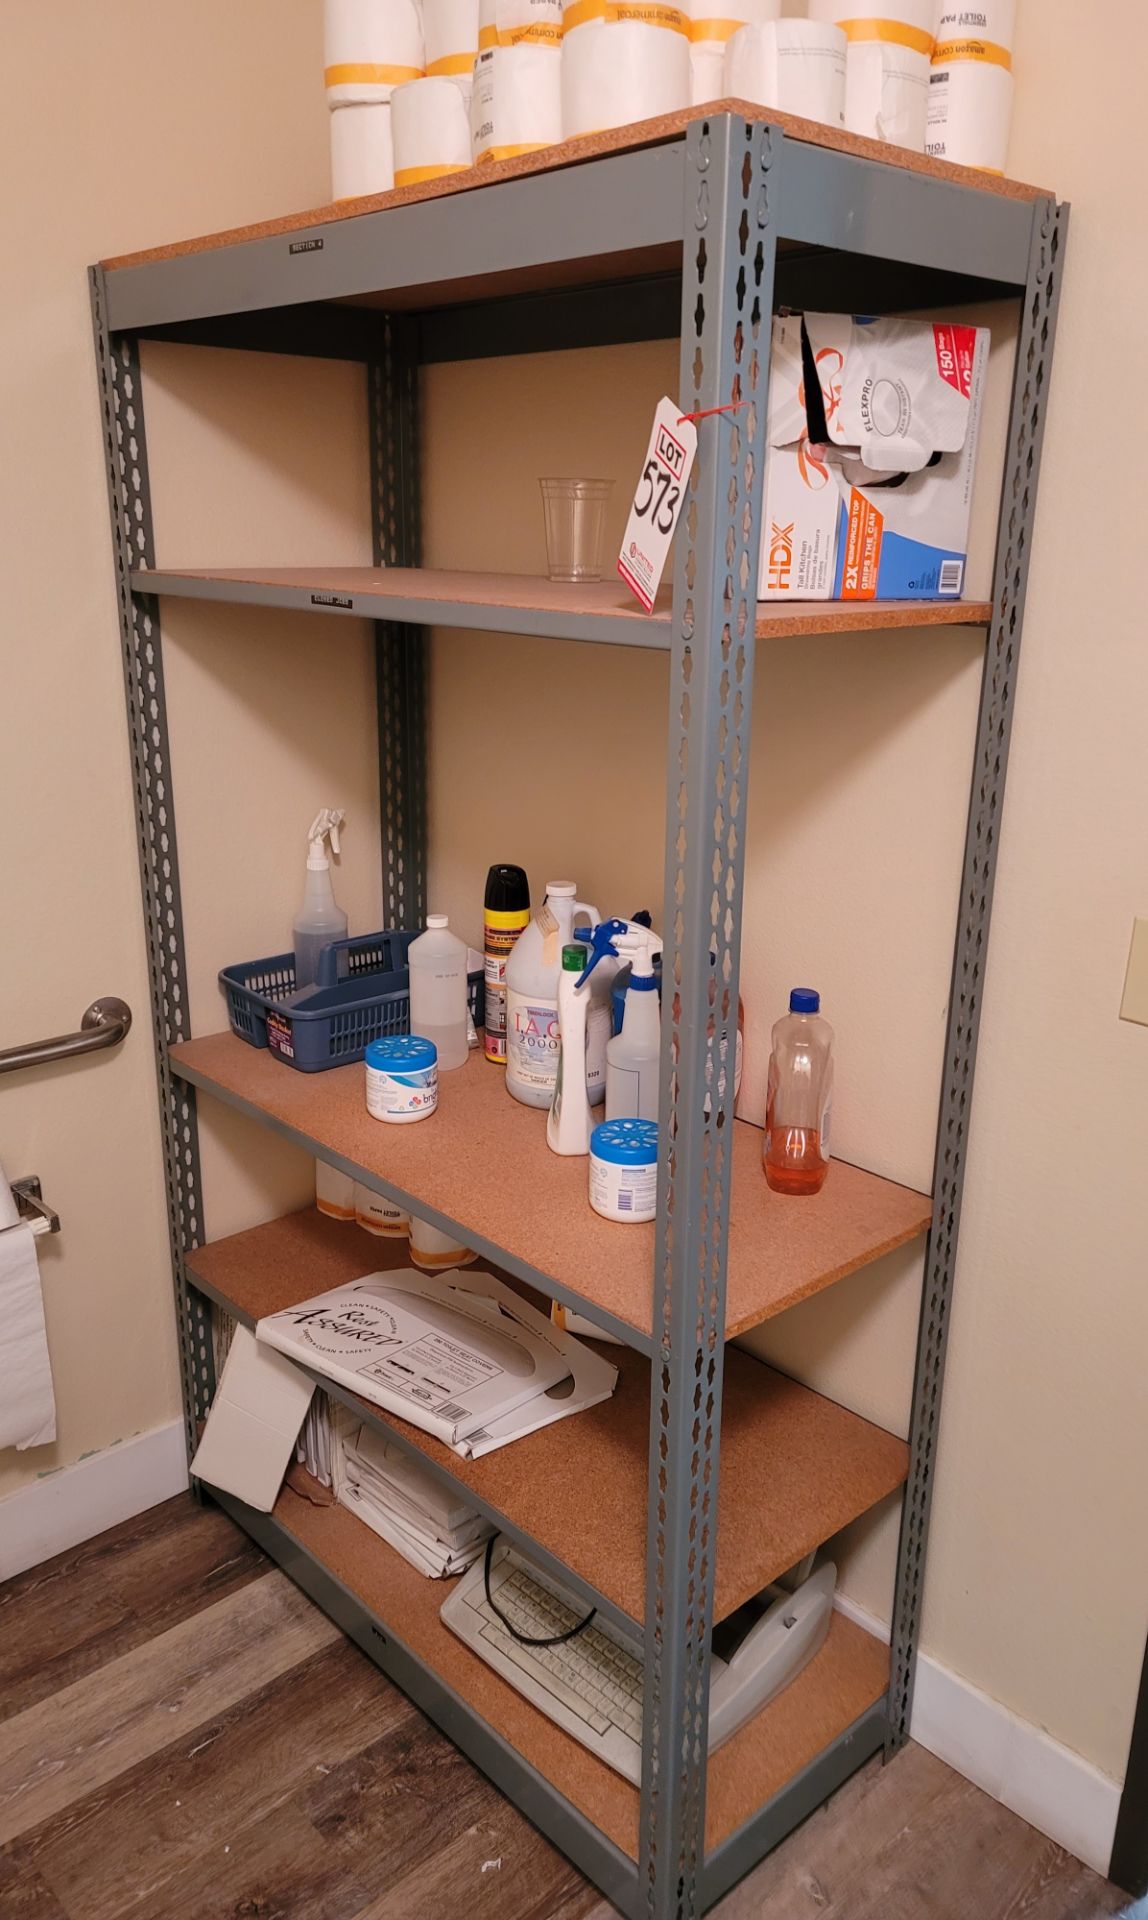 LOT - (2) 42" X 18" ADJUSTABLE SHELF UNITS, CONTENTS NOT INCLUDED (LOCATION: SAN DIEGO, CA)